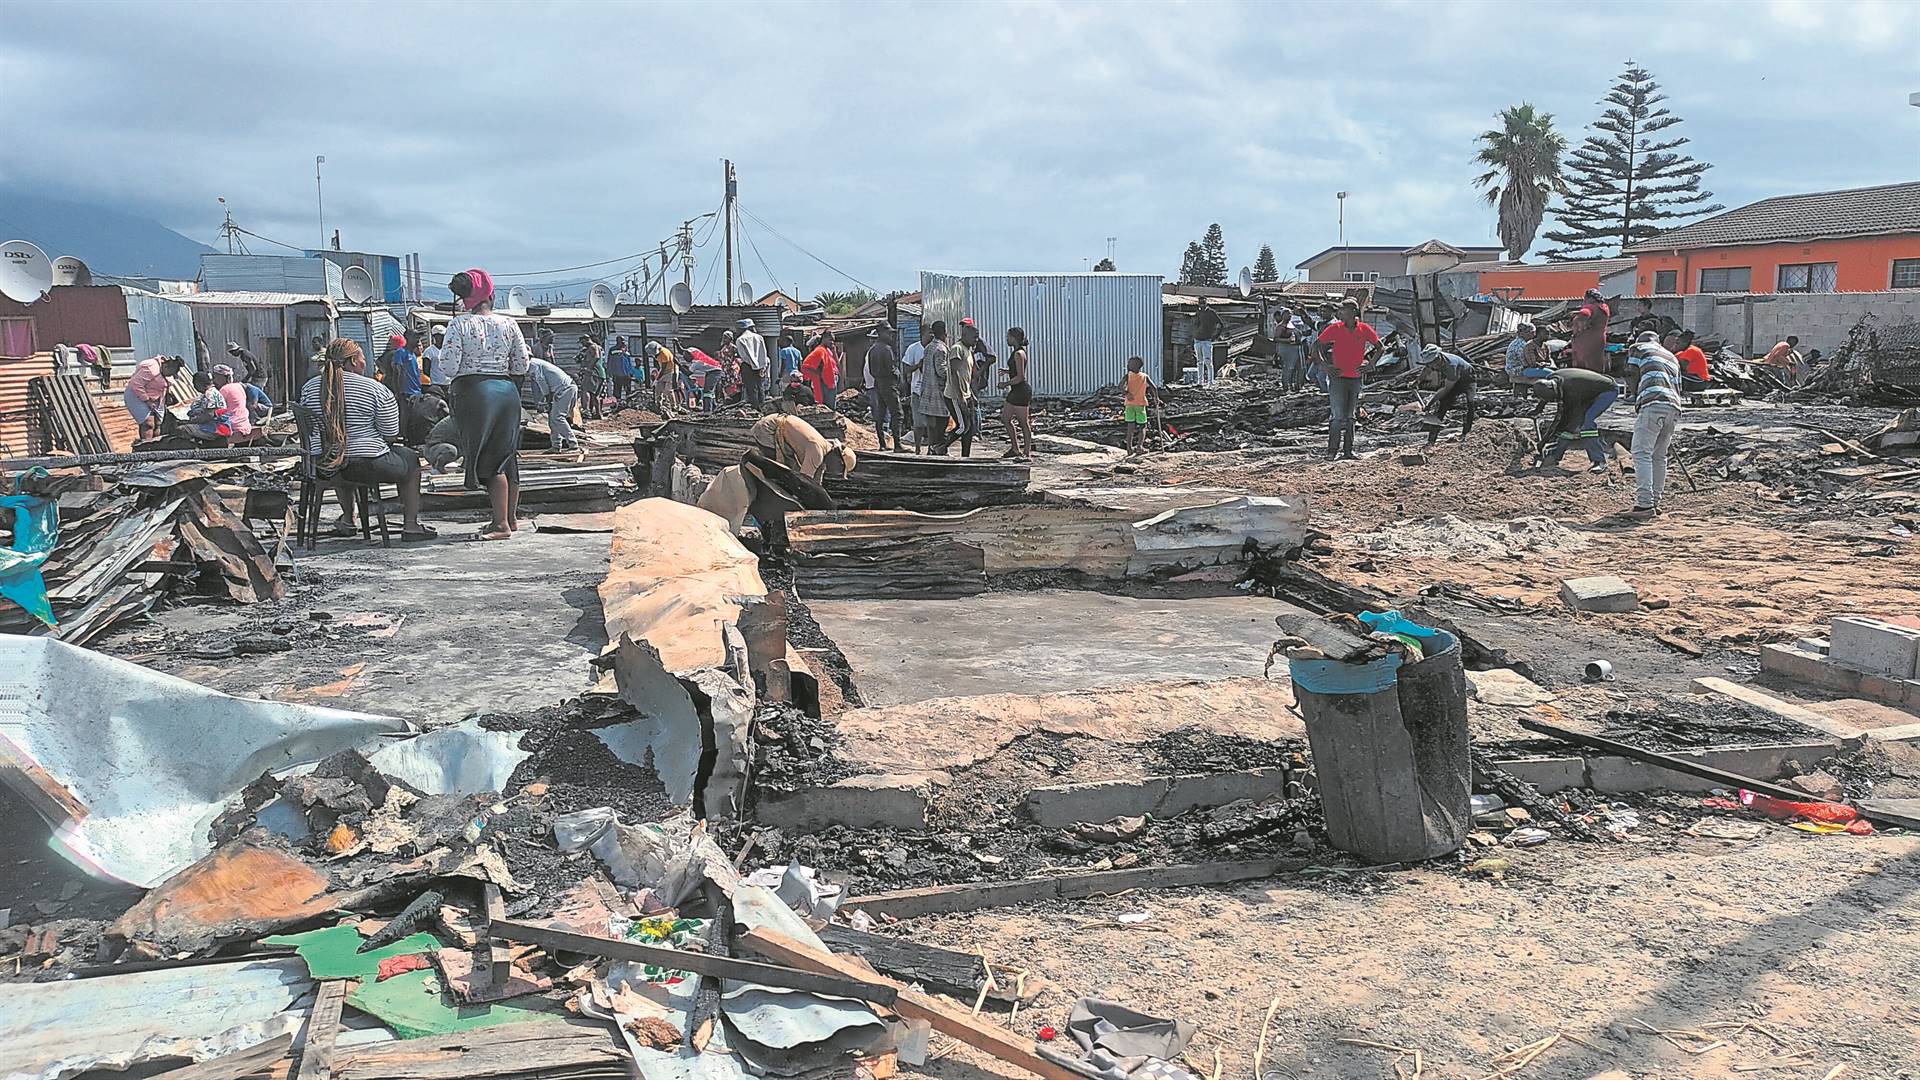 Easter weekend excitement quickly turned into disaster for hundreds of informal settlement dwellers when their shacks were swept by raging fires in different parts of Cape Town. At least more than 600 people were left homeless. PHOTO: Unathi Obose